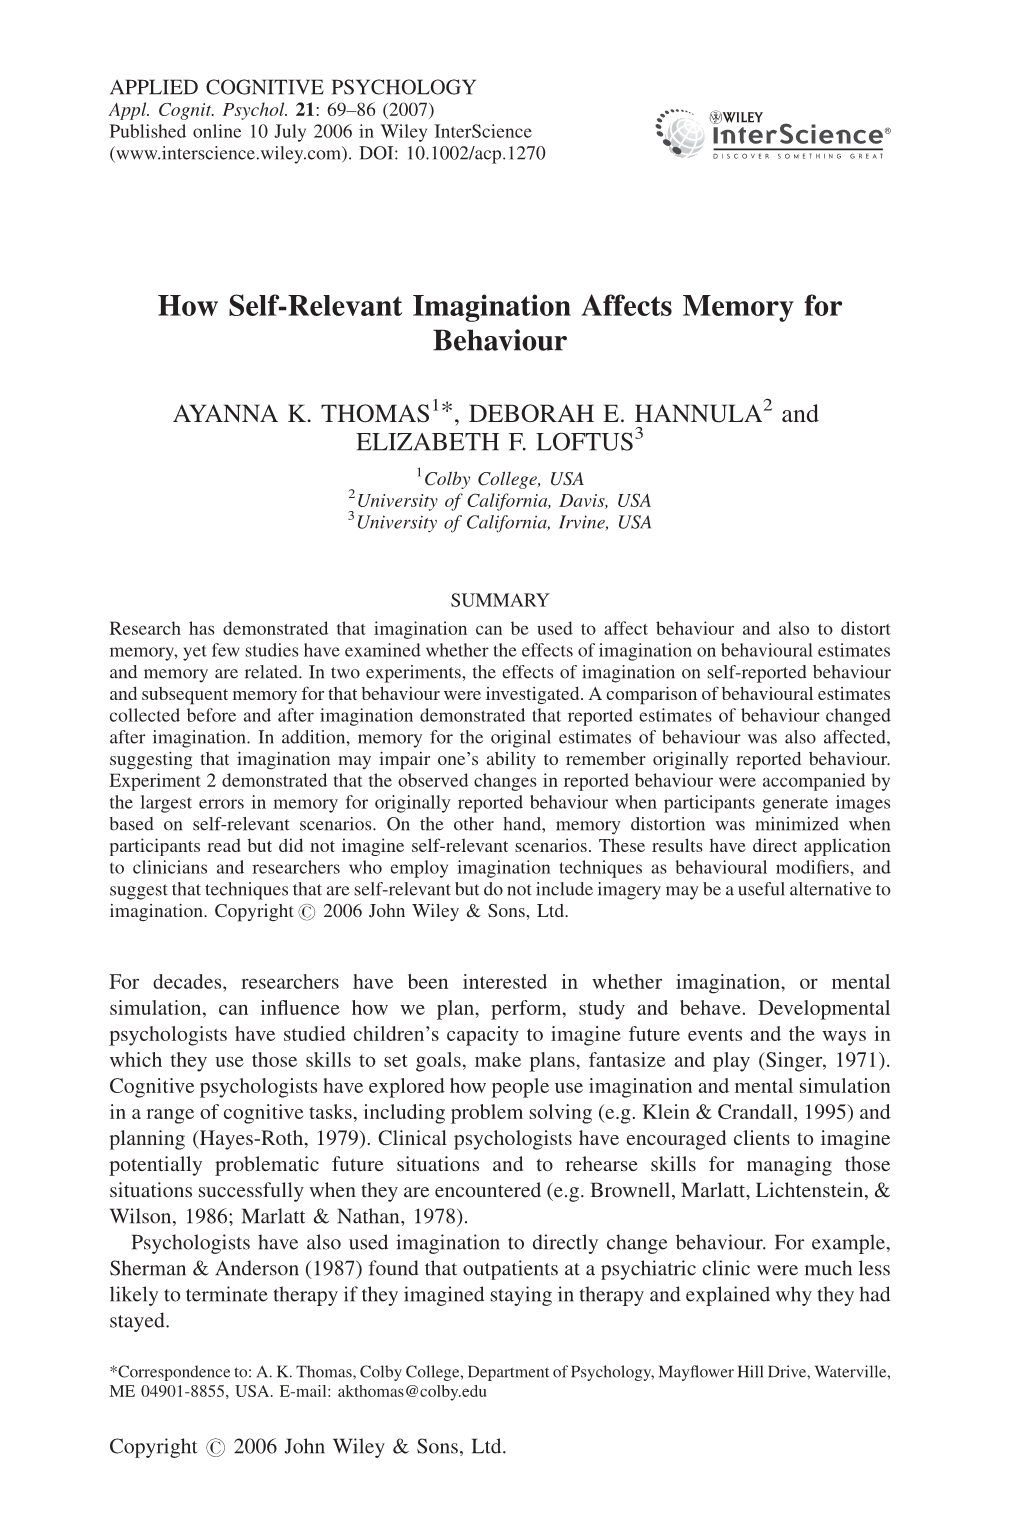 How Self-Relevant Imagination Affects Memory for Behaviour